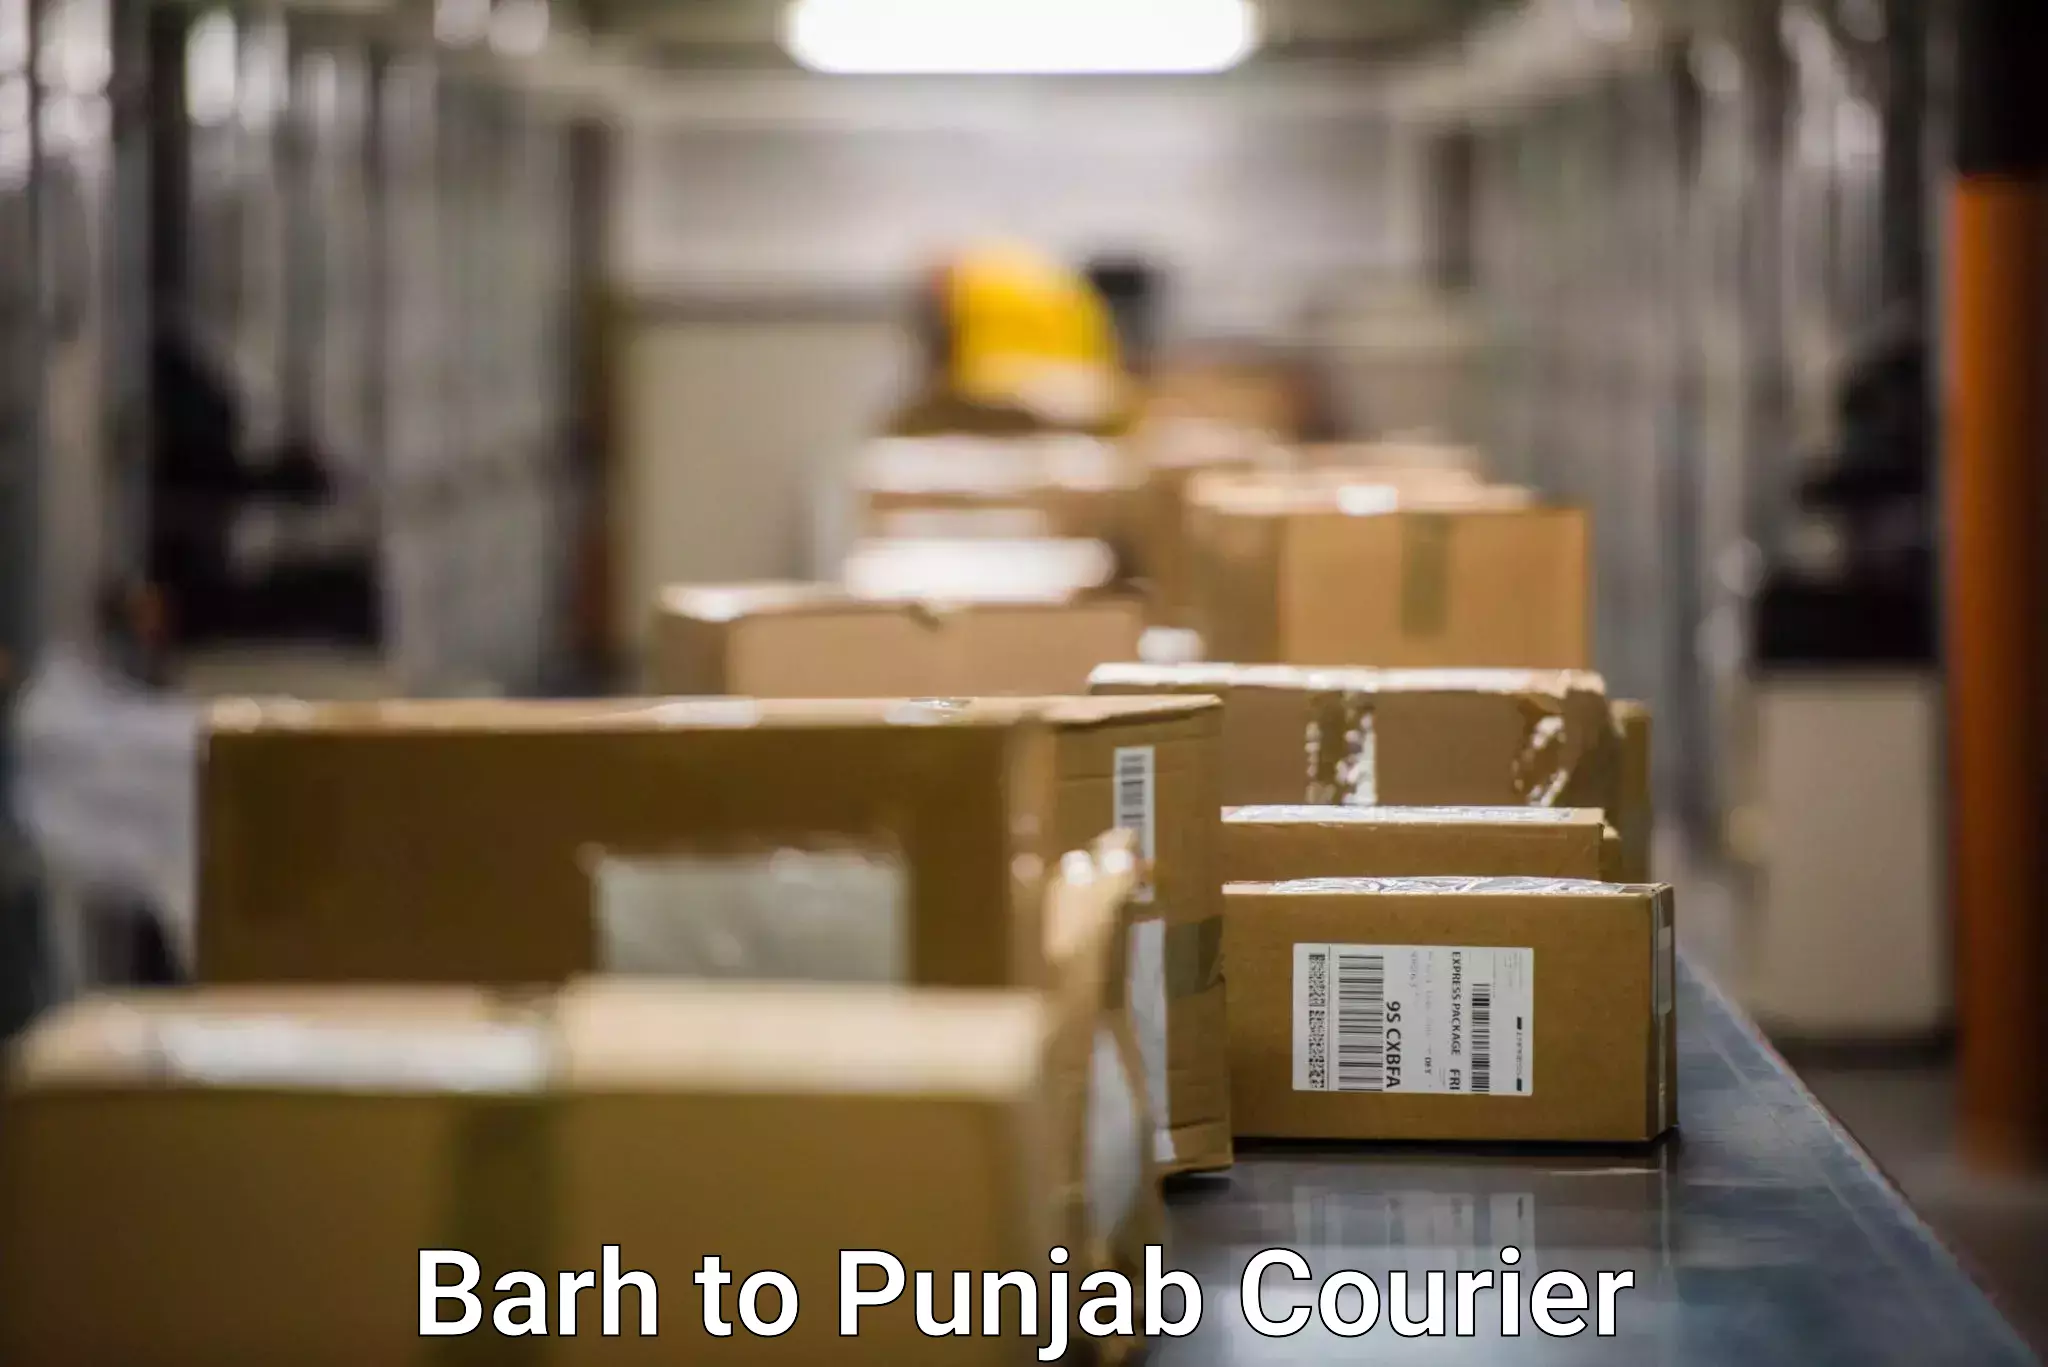 State-of-the-art courier technology in Barh to Punjab